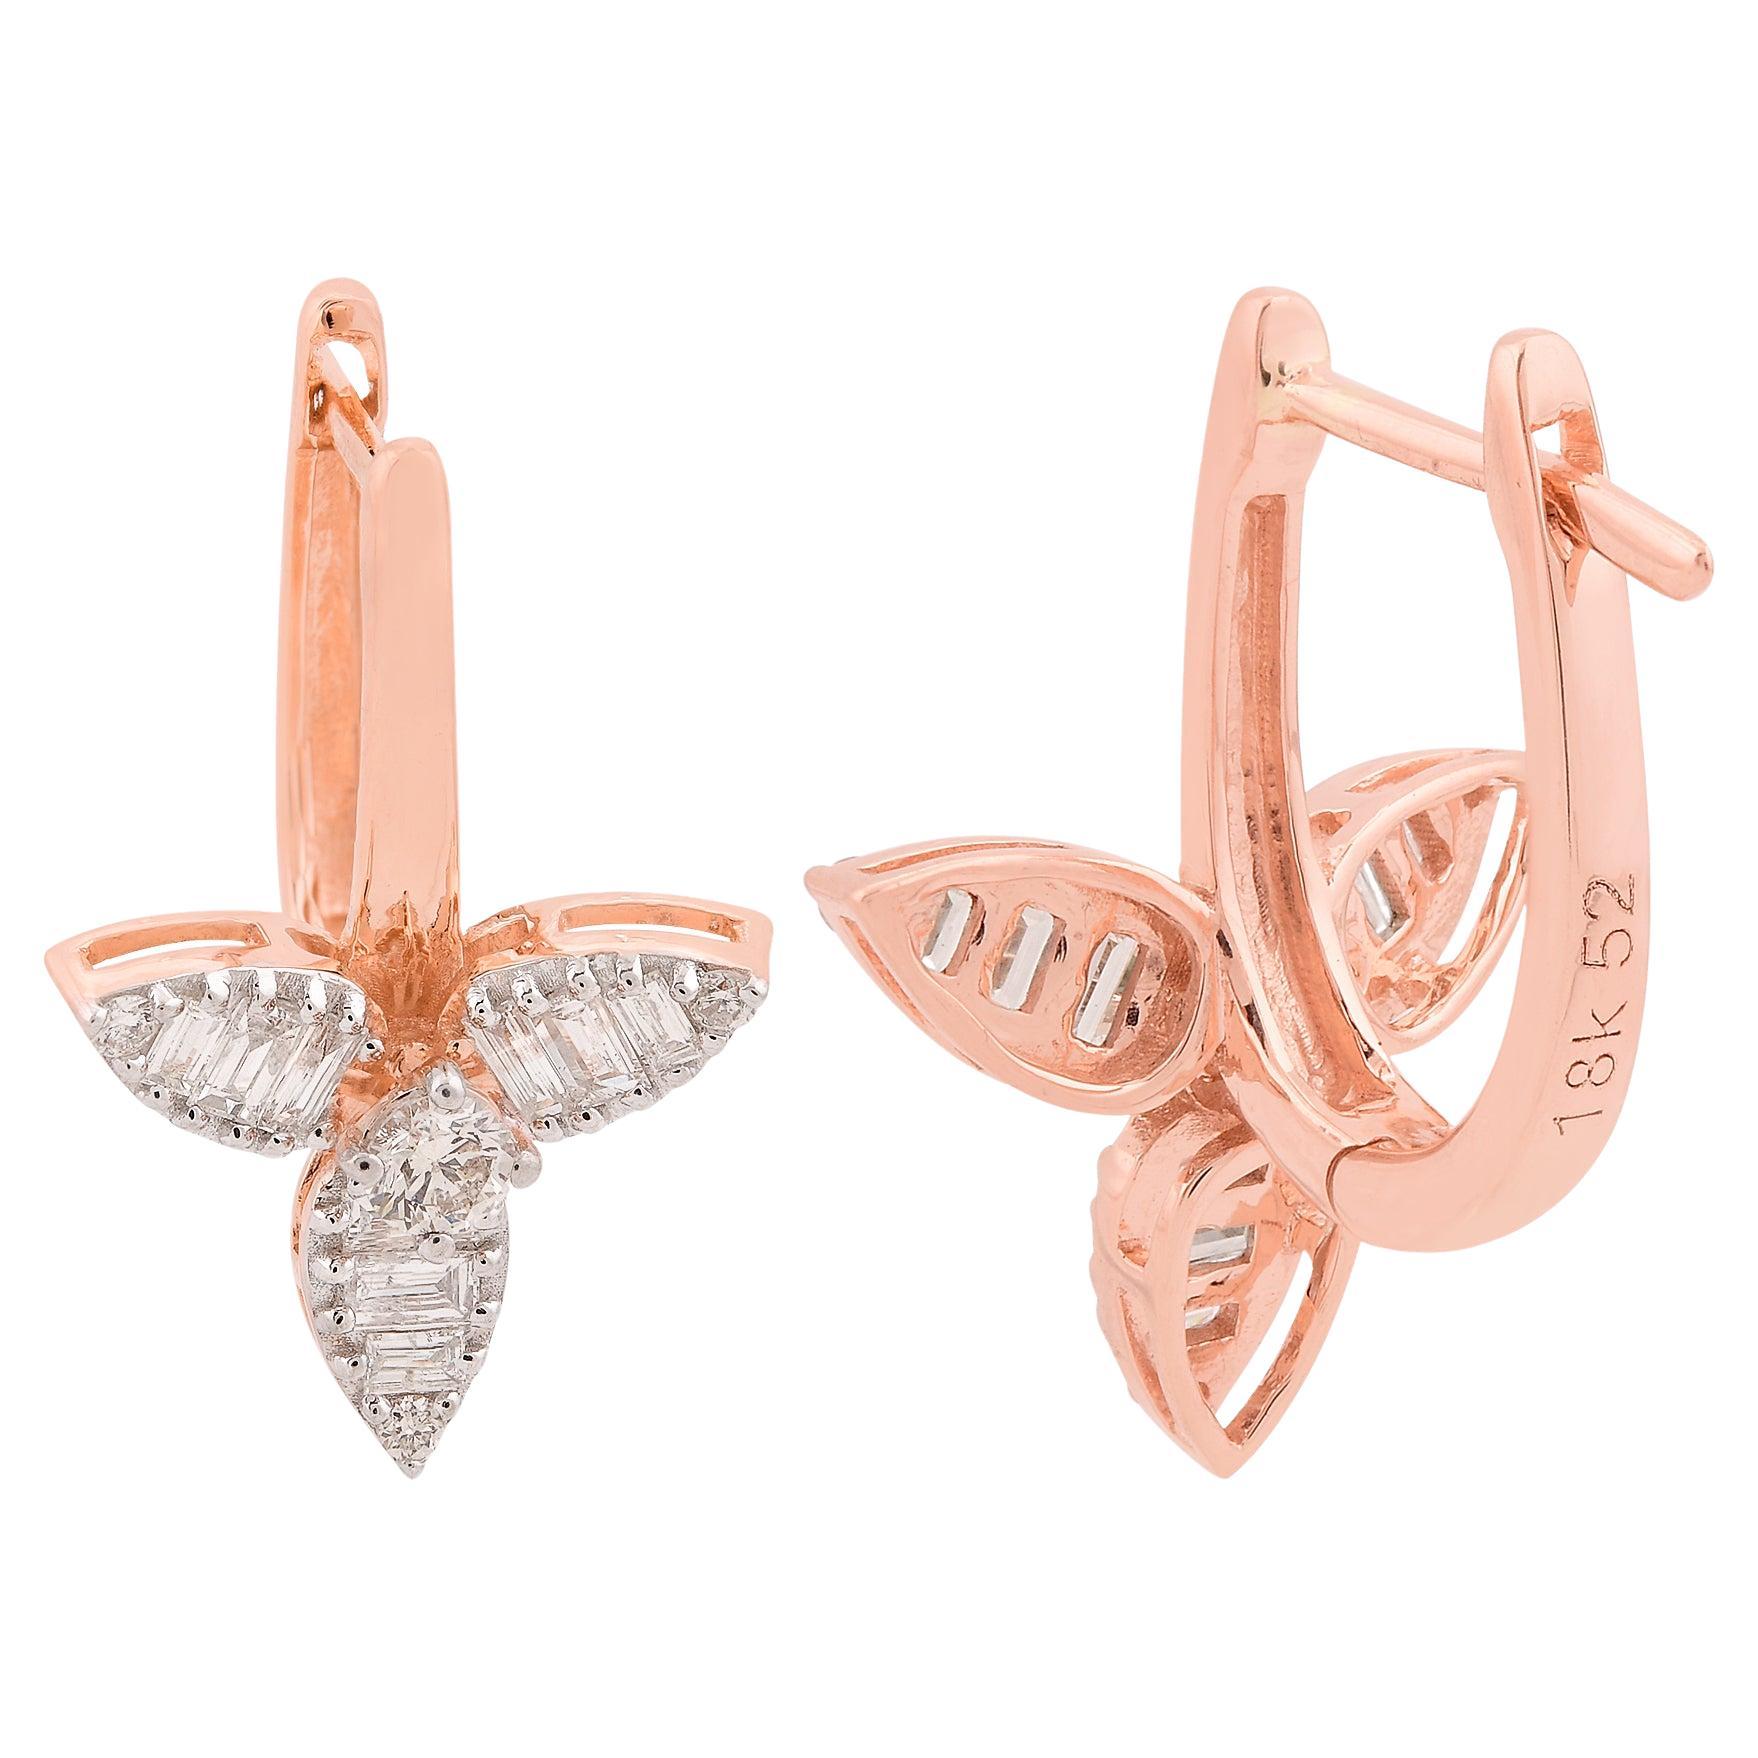 Item Code :- SEE-11755A
Gross Weight :- 4.41 grams
Solid 18k Rose Gold Weight :- 4.26 grams
Natural Diamond Weight :- 0.73 carat ( AVERAGE DIAMOND CLARITY SI1-SI2 & COLOR H-I )
Earrings Size :- 20 mm approx.

✦ Sizing
.....................
We can